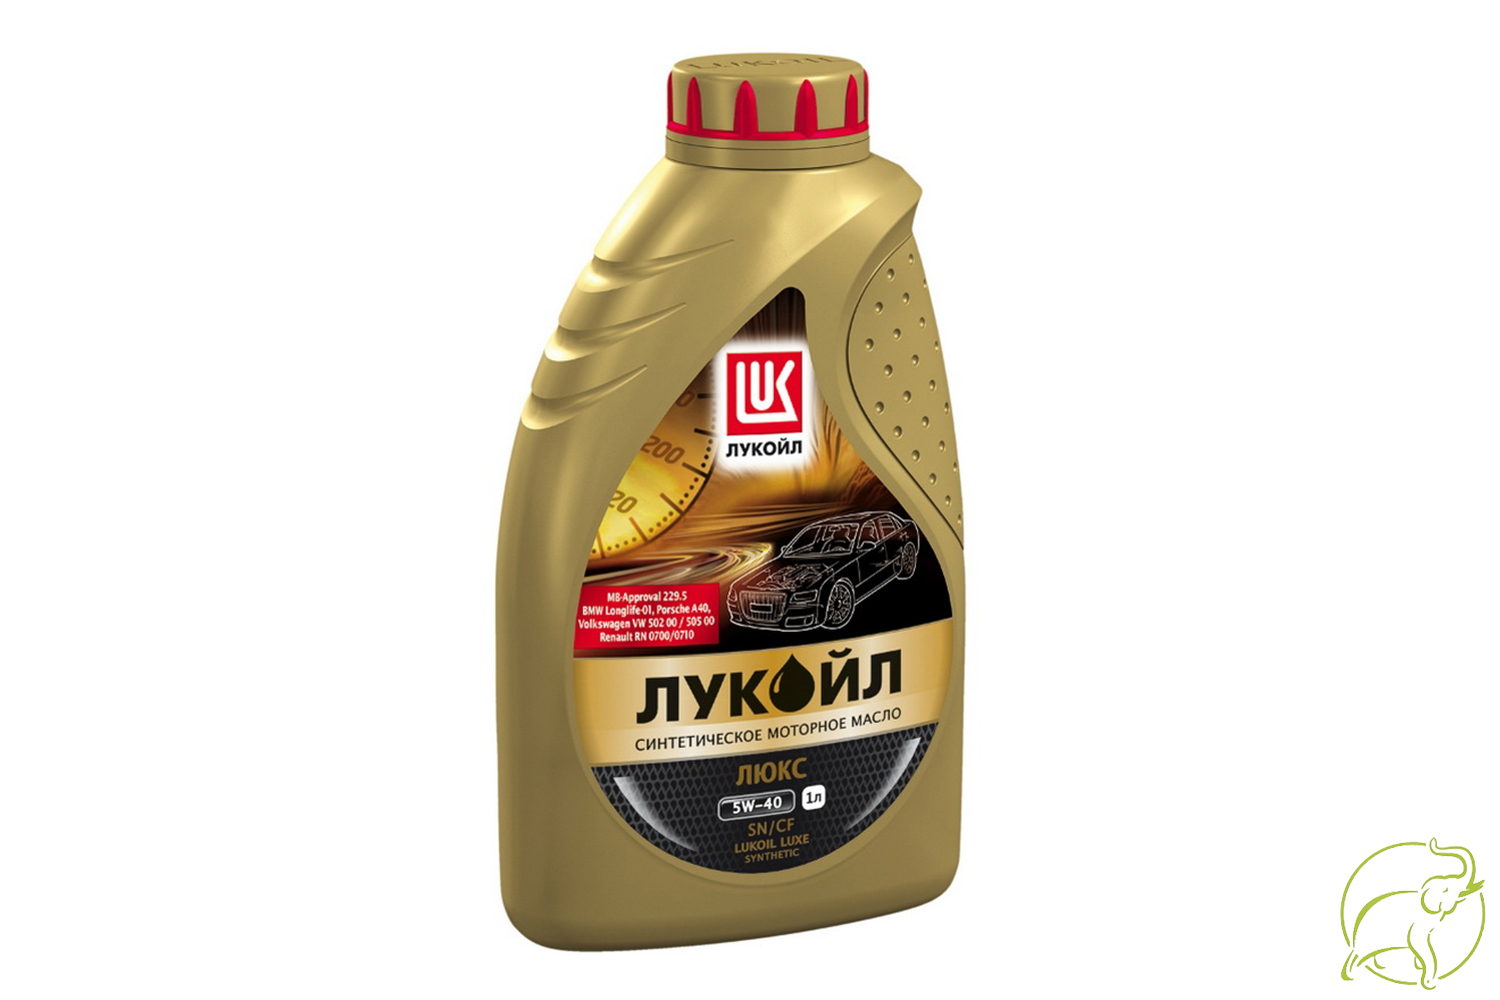 Масло лукойл люкс 5w 40. Масло Лукойл Люкс 1л синт 5w40. Lukoil Luxe, Synthetic SAE 5w-40, API SN/CF. Масло моторное Лукойл Люкс синтетическое SAE 5w-40 API SN/CF. Масло Лукойл Люкс моторное синтетич.SAE 5w40 1л.